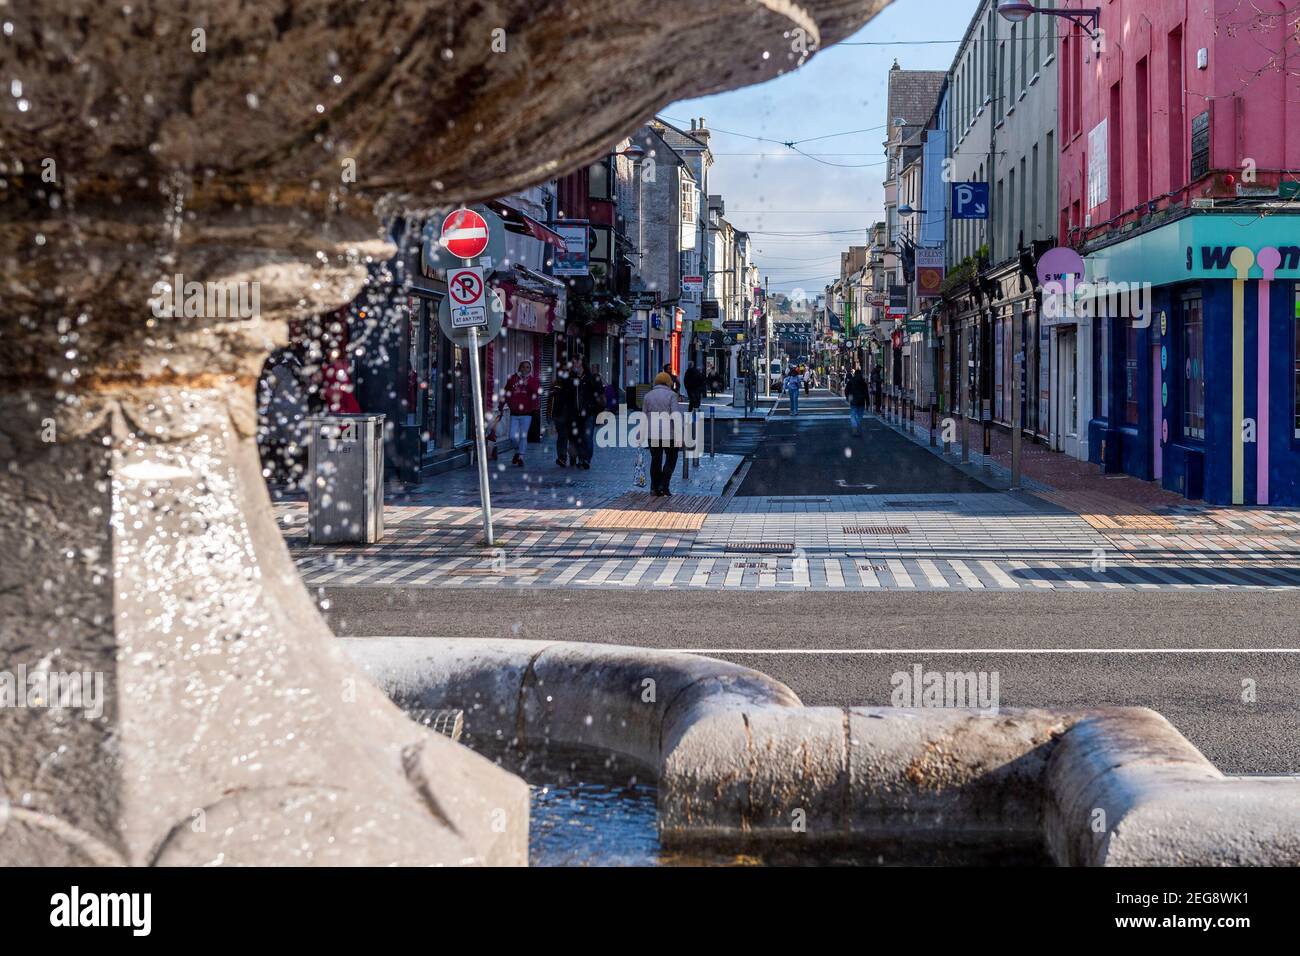 Cork, Ireland. 18th Feb, 2021. People in Cork city centre go about their business during the government's level 5 lockdown. Credit: AG News/Alamy Live News Stock Photo